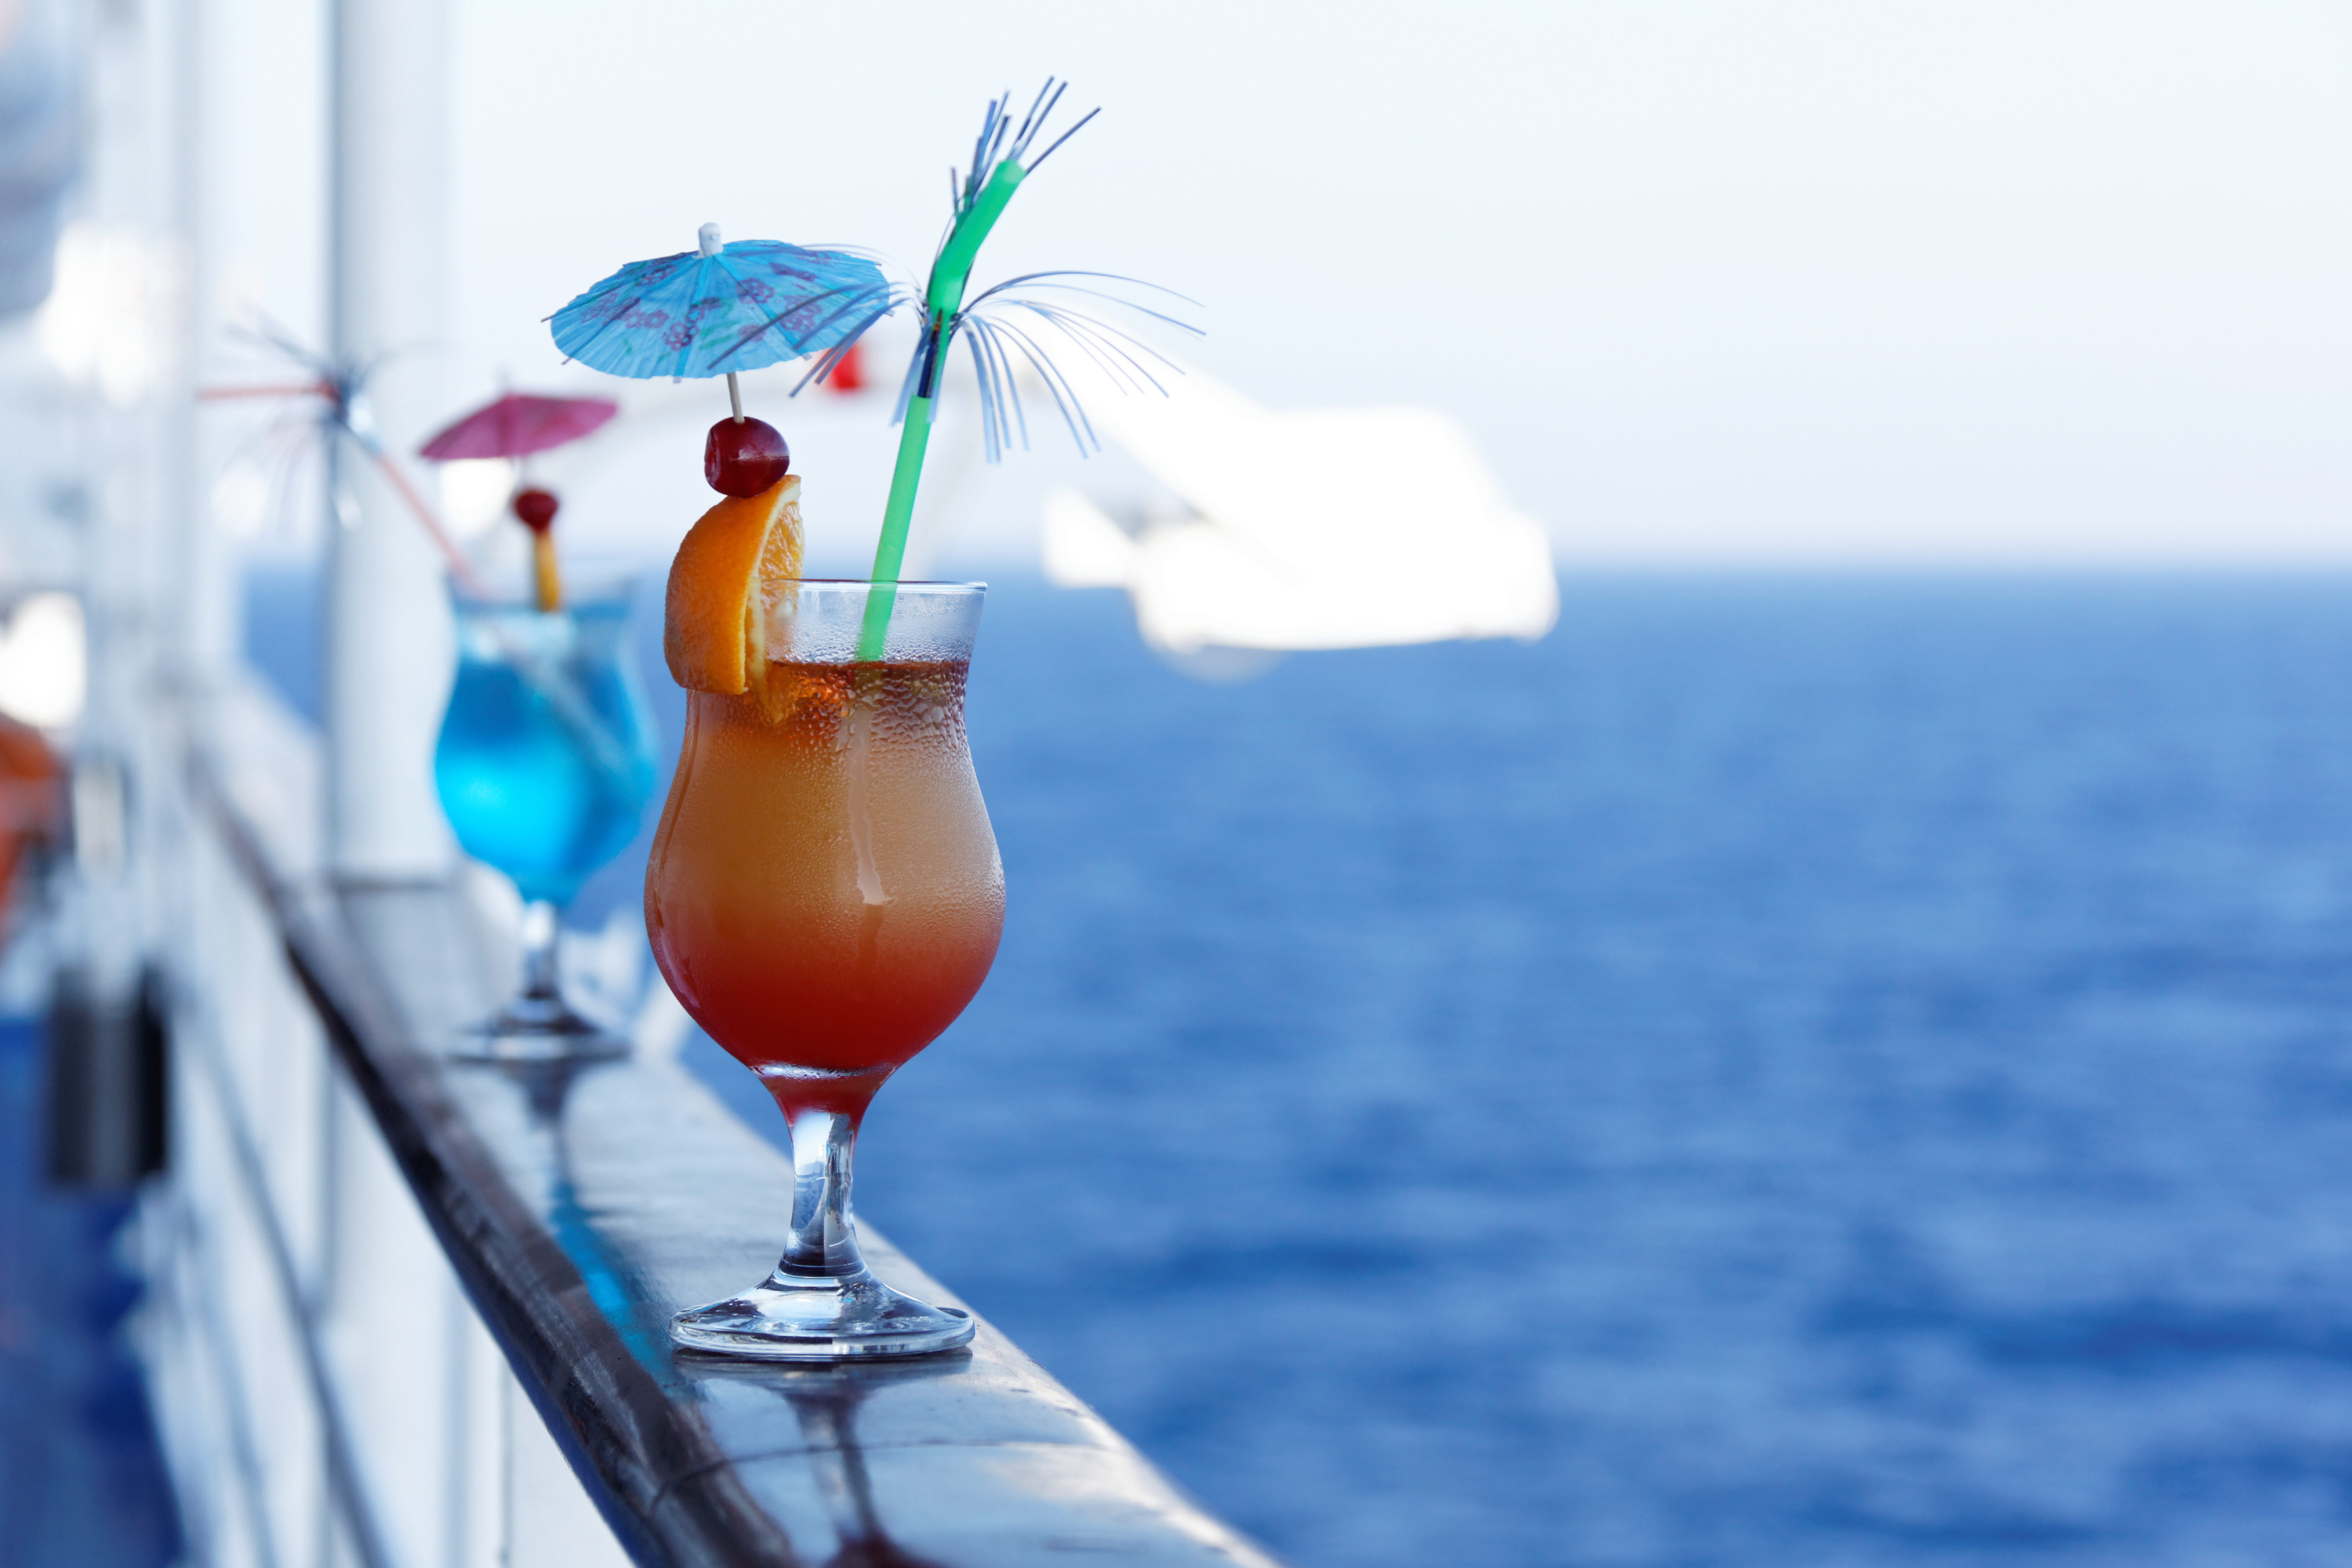 cruise drinks | 62 thoughts on a cruise